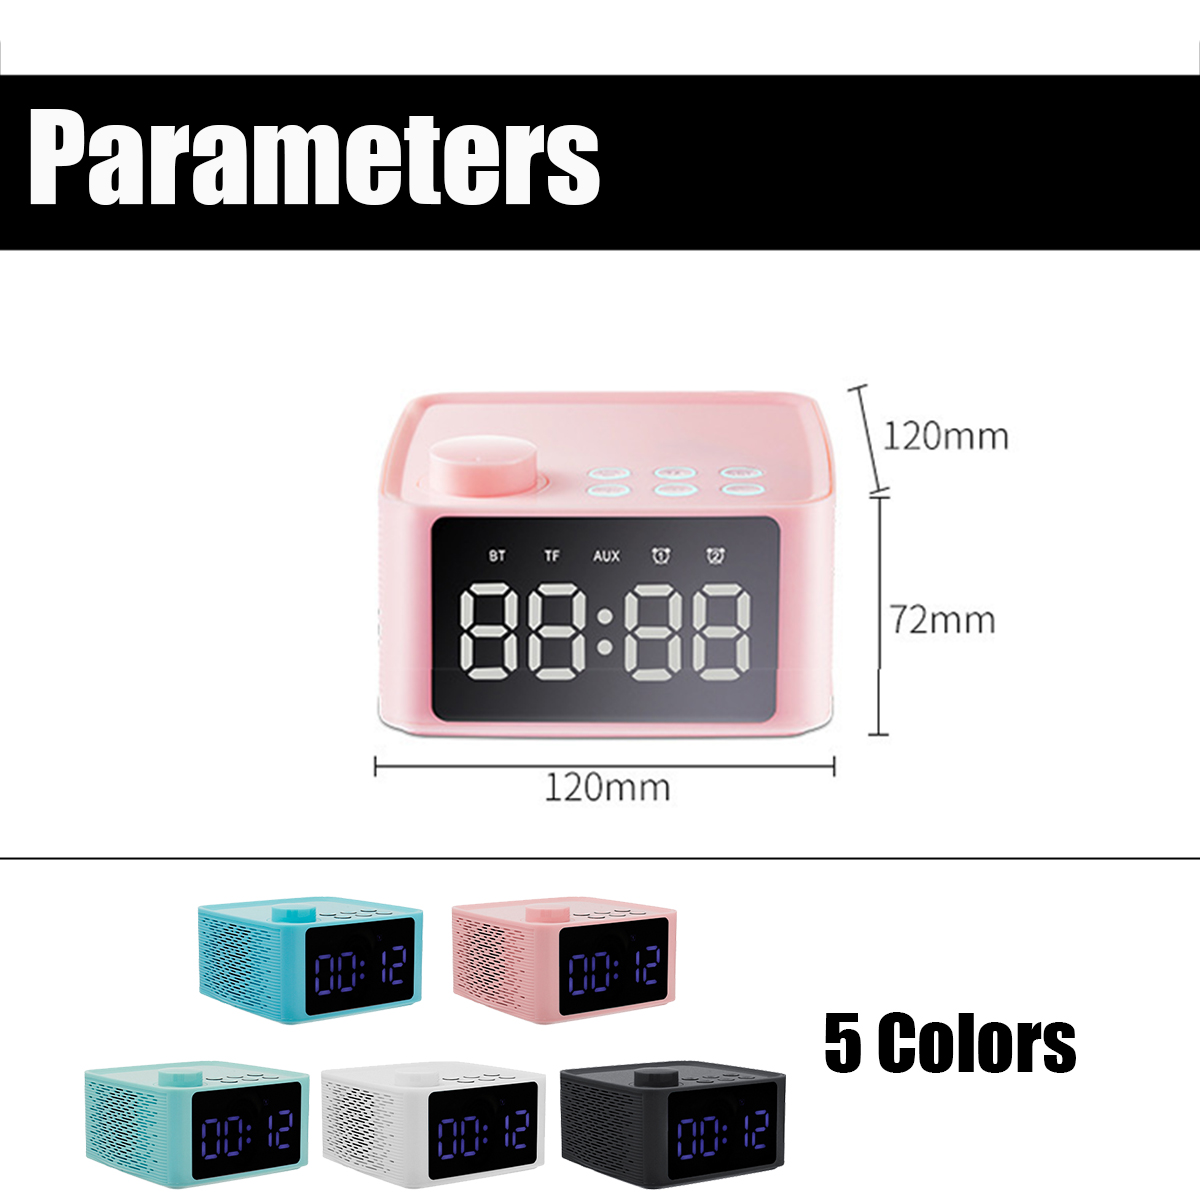 2-In-1-Wireless-Stereo-bluetooth-50-Speaker-Dual-Alarm-Clock-Subwoofer-Hifi-Music-Player-With-Phone--1432185-4